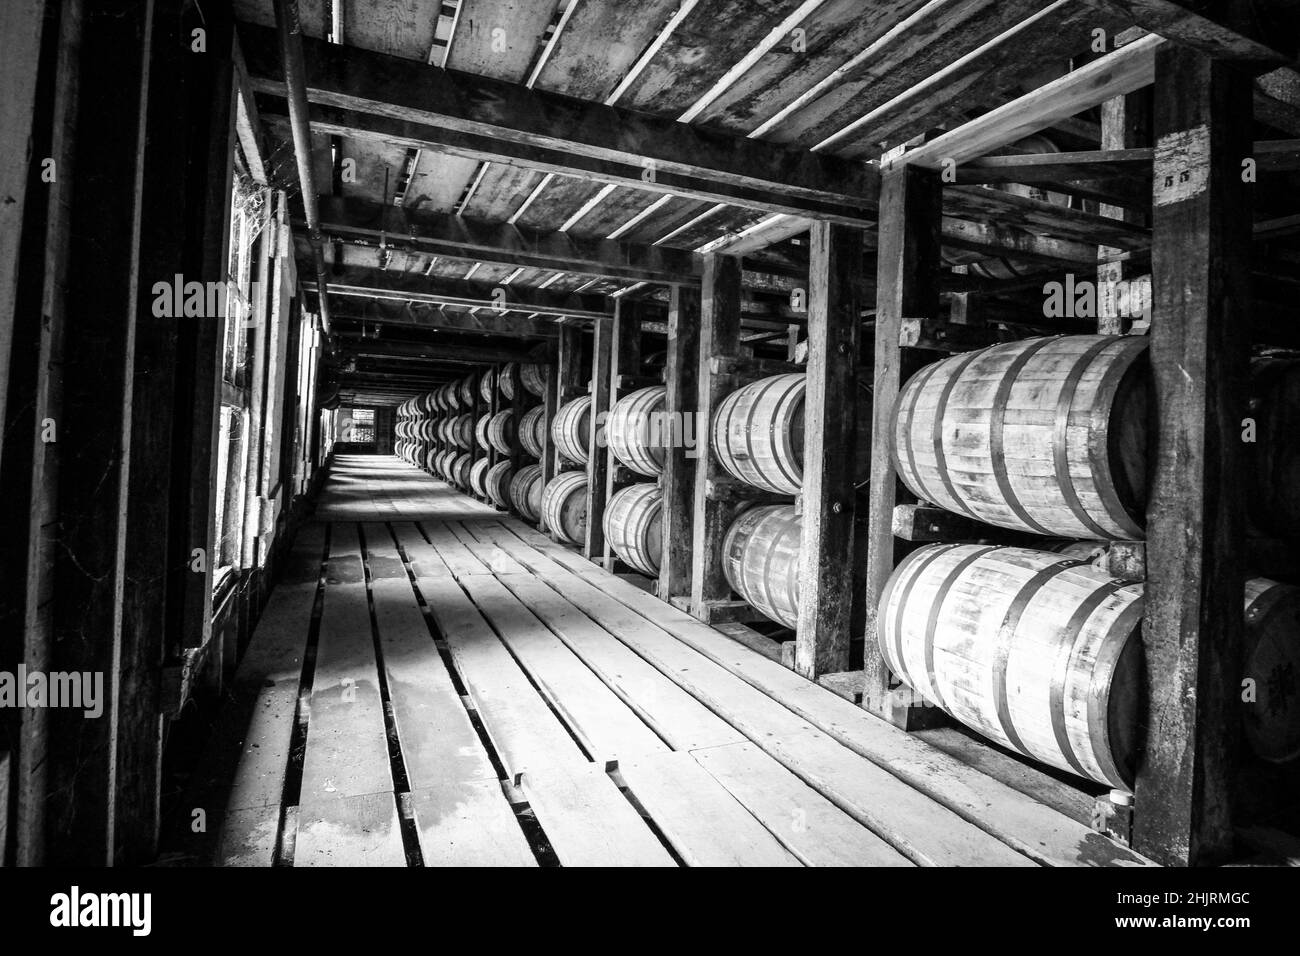 Visiting a bourbon distillery rick house. Looking down the aisle at all the rows of barrels aging. Stock Photo